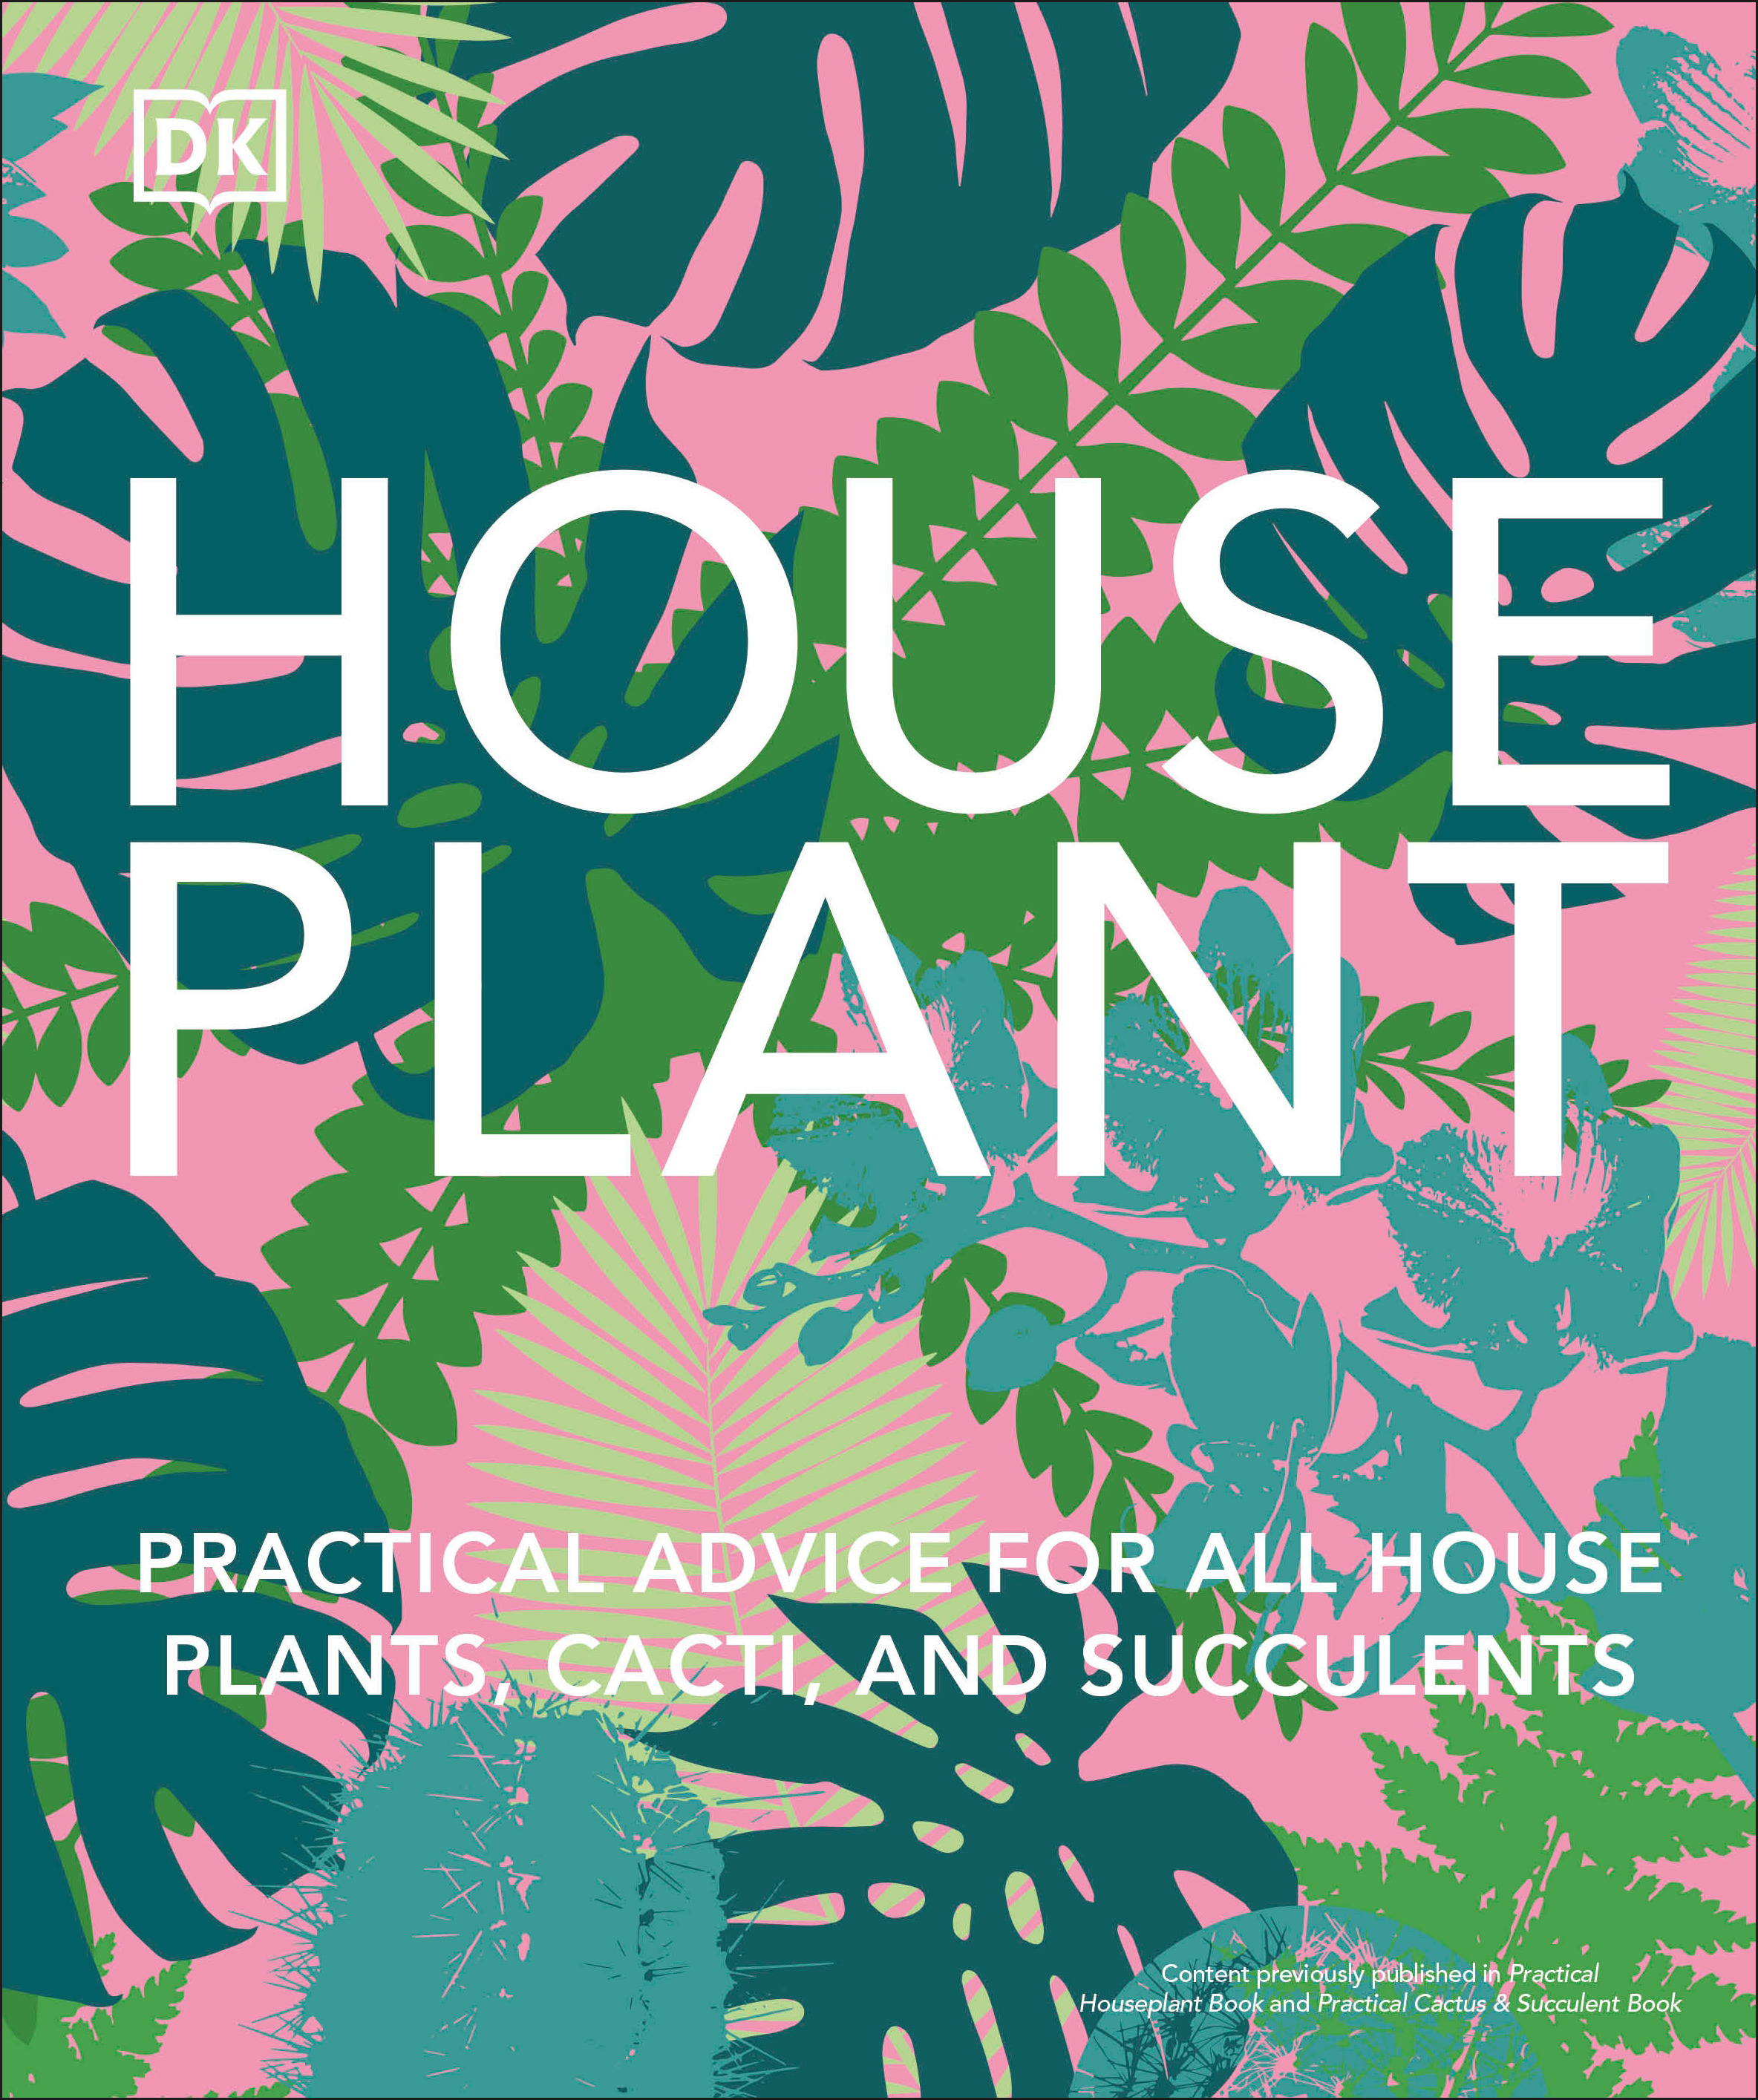 Houseplant : Practical Advice for All Houseplants, Cacti, and Succulents | 